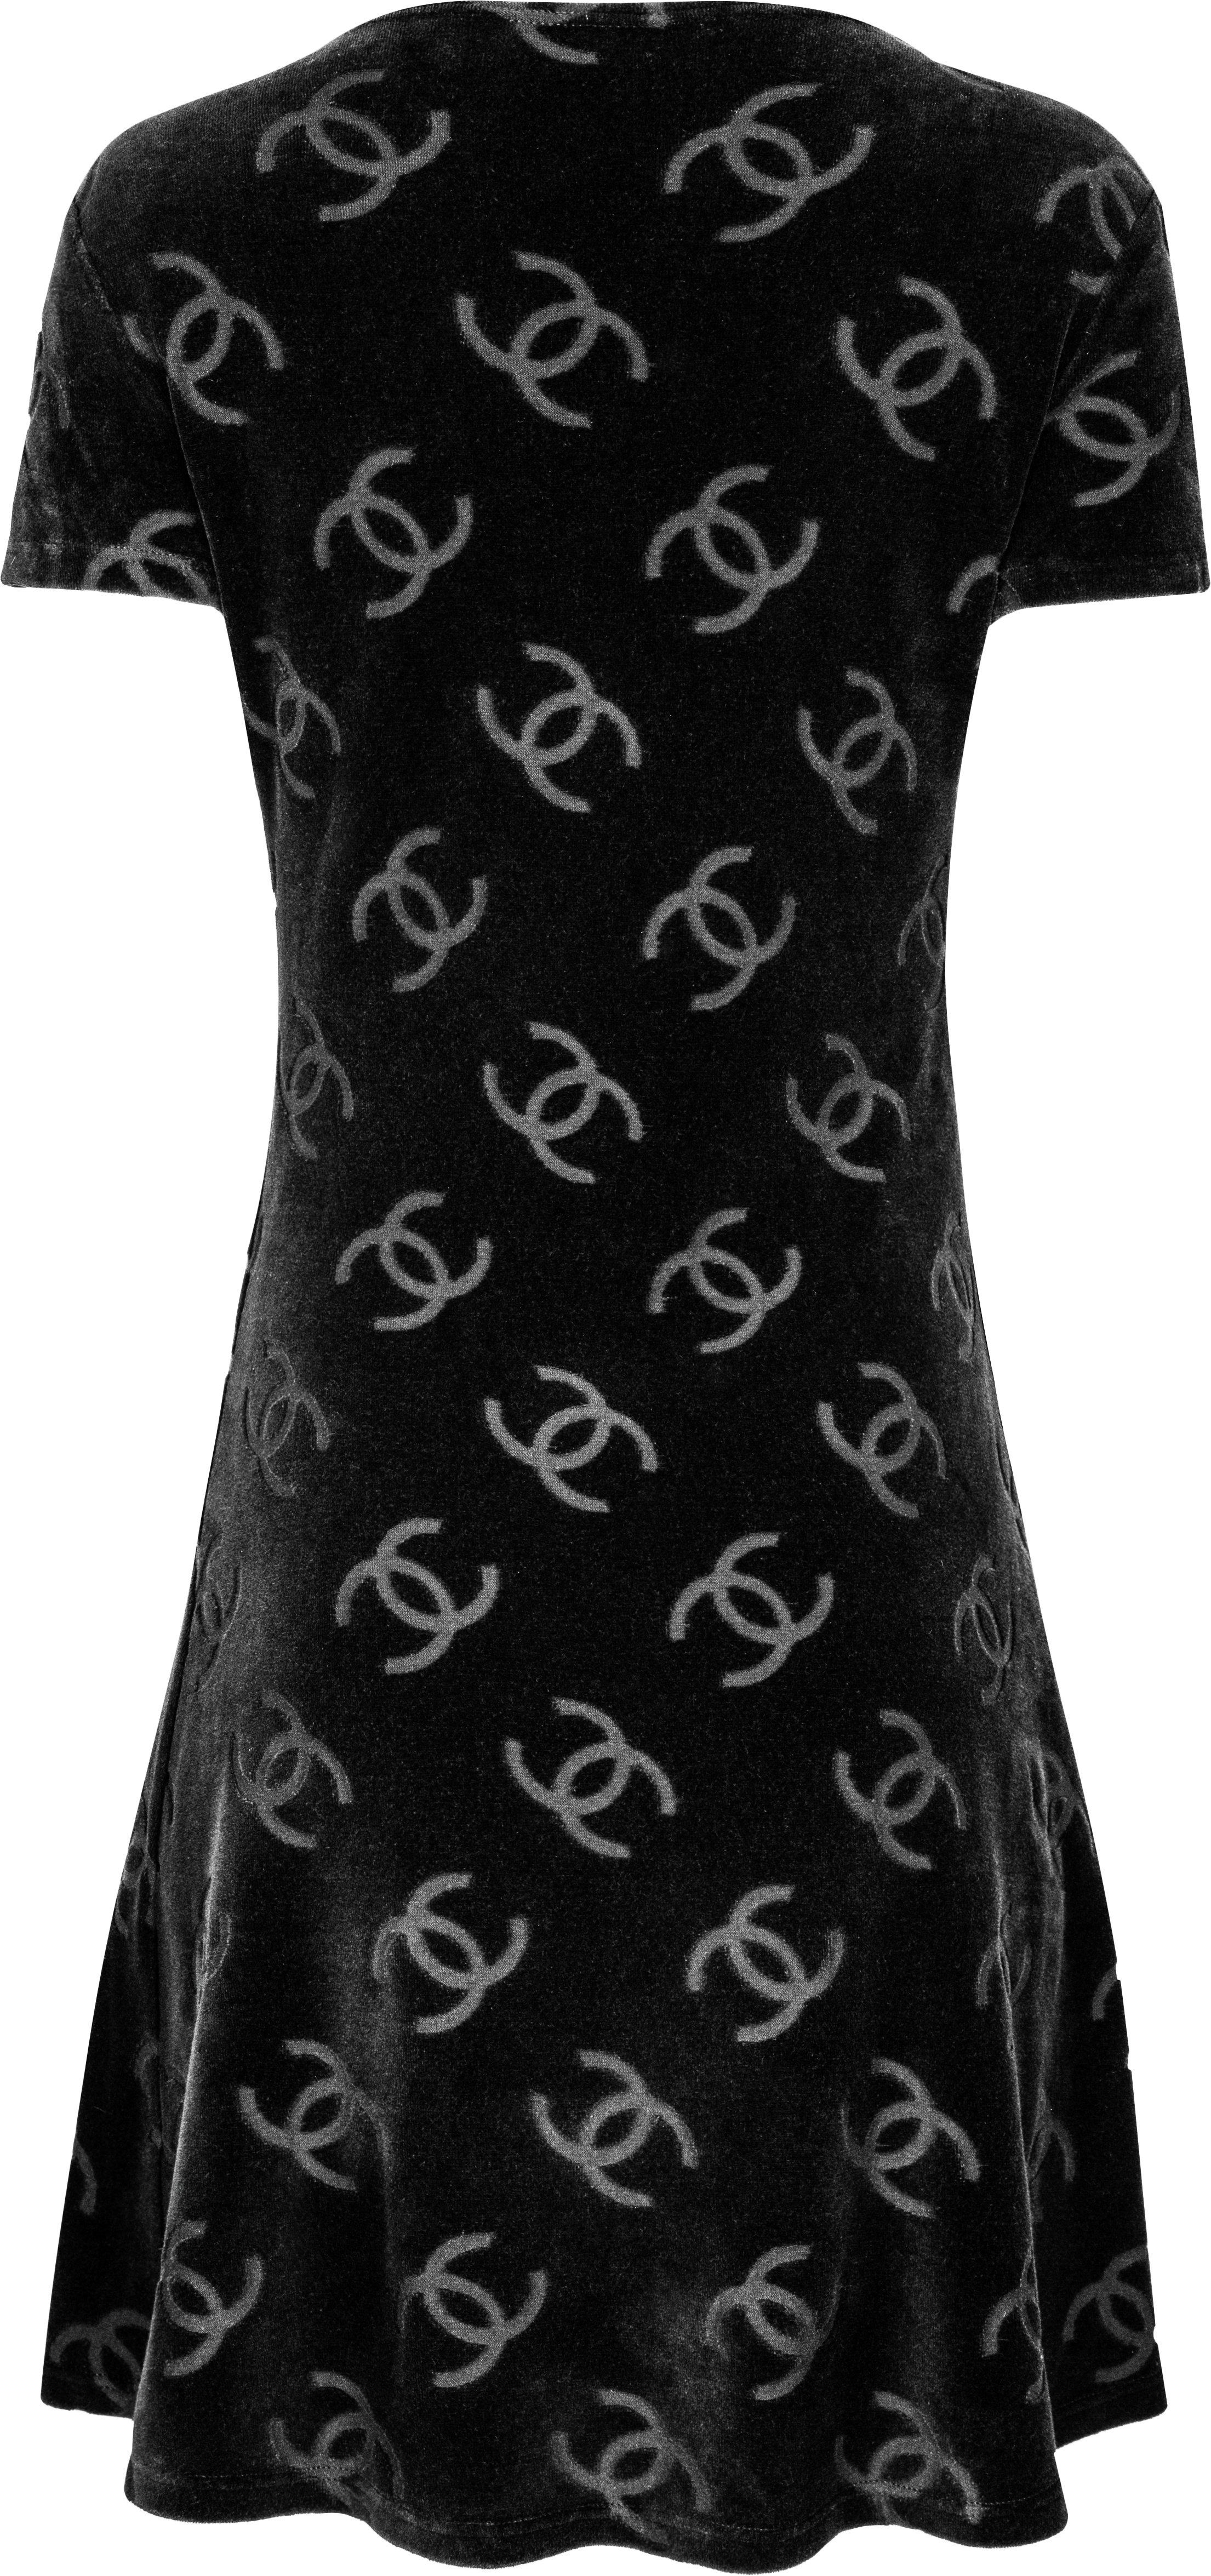 Iconic velour mini dress in black with Chanel logo print from the spring 1996 runway collection designed by Karl Lagerfeld for Chanel.

Bust: 32-36